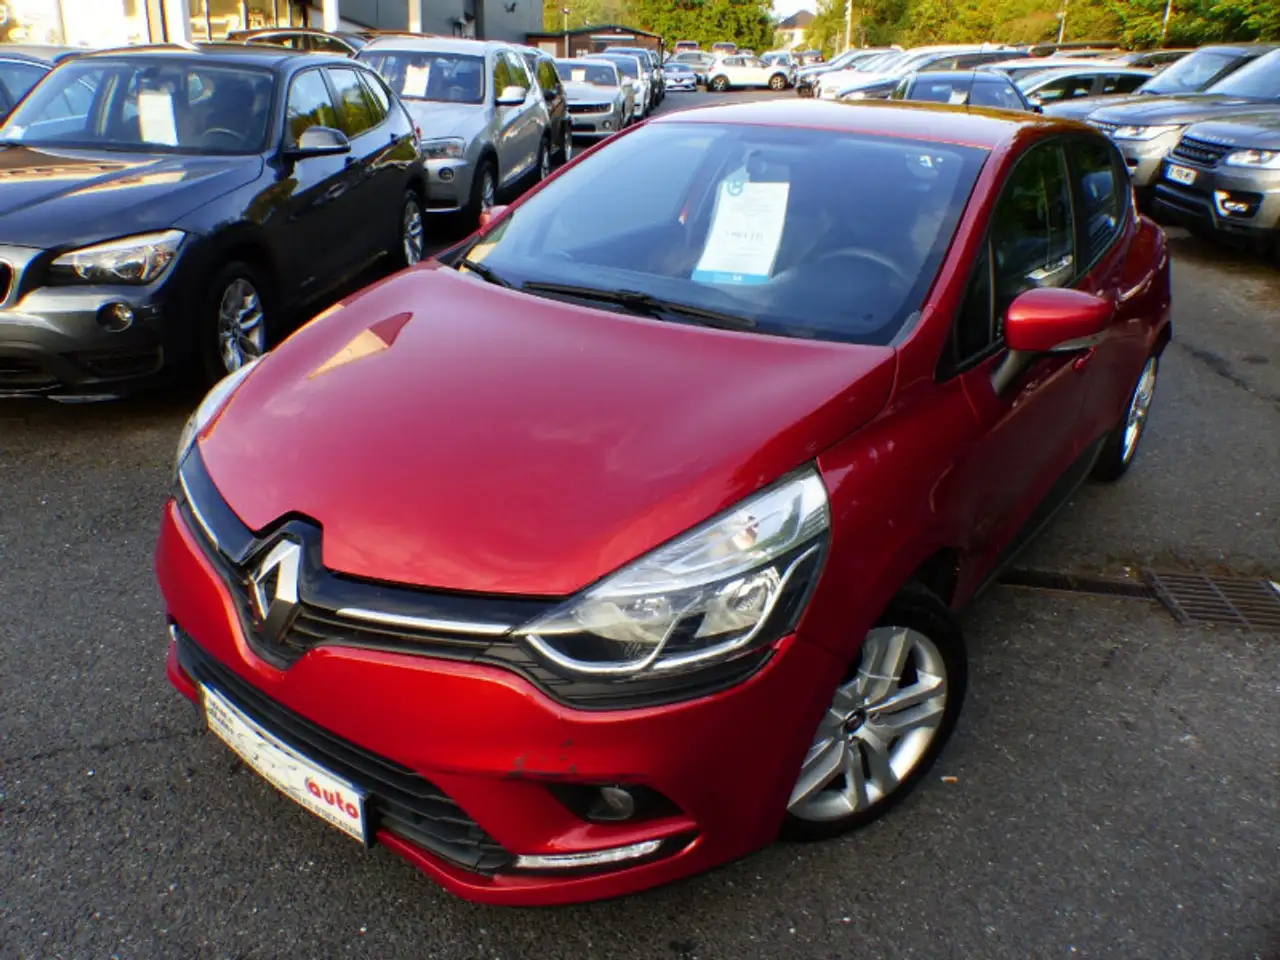 Renault Clio 0.9 TCE 90CH ENERGY BUSINESS 5P EURO6C